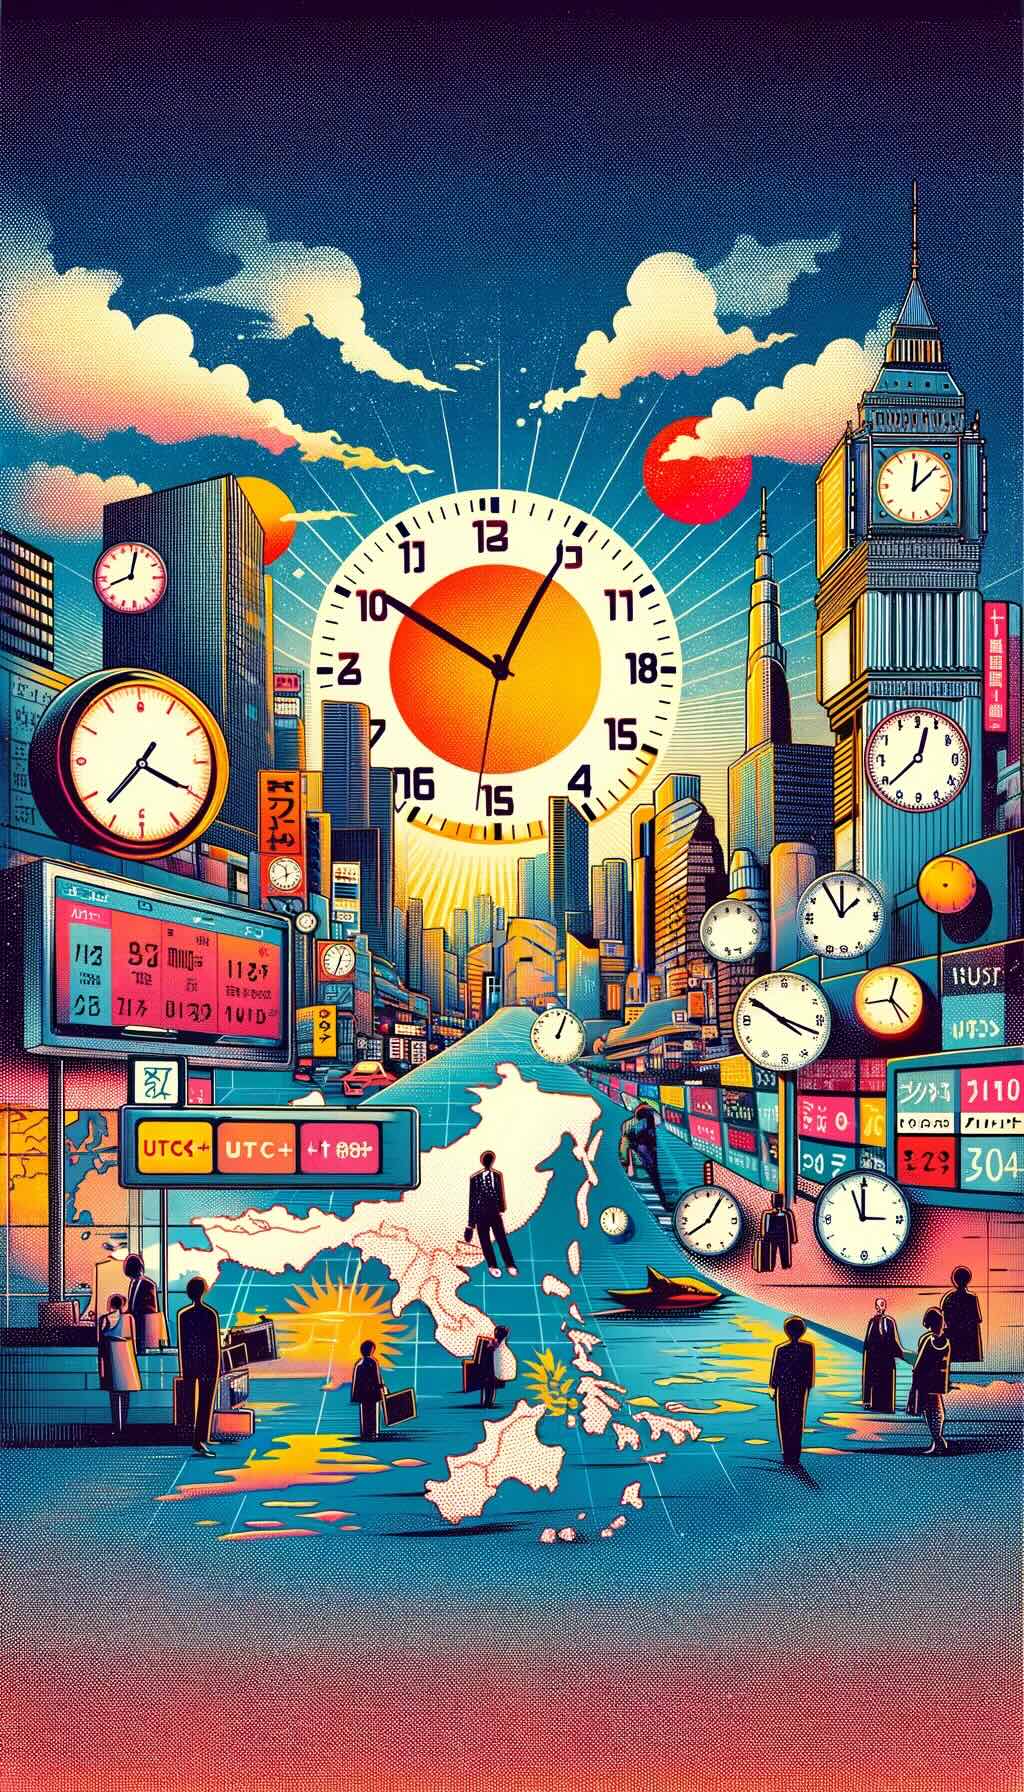 Explores Japan Standard Time (JST) in the context of regional travel. It juxtaposes JST with neighboring time zones, such as South Korea (UTC+9), China (UTC+8), and Southeast Asian countries (UTC+7). The artwork illustrates travelers experiencing time shifts while moving between these regions, capturing moments like the sun setting in Tokyo and rising in Beijing. The image shows the orchestration of multi-country itineraries in East Asia, featuring visual cues like clocks set to different times, world clock apps, and a map highlighting time zone differences. It emphasizes the ripple effects of time differences on business and cultural exchanges, including international meetings and regional events. This artwork captures the complexity and beauty of navigating time zones in East Asia, depicted in a unique blend of retro fade, Pop-art, and Avant Garde styles, symbolizing the harmony and diversity of regional timekeeping